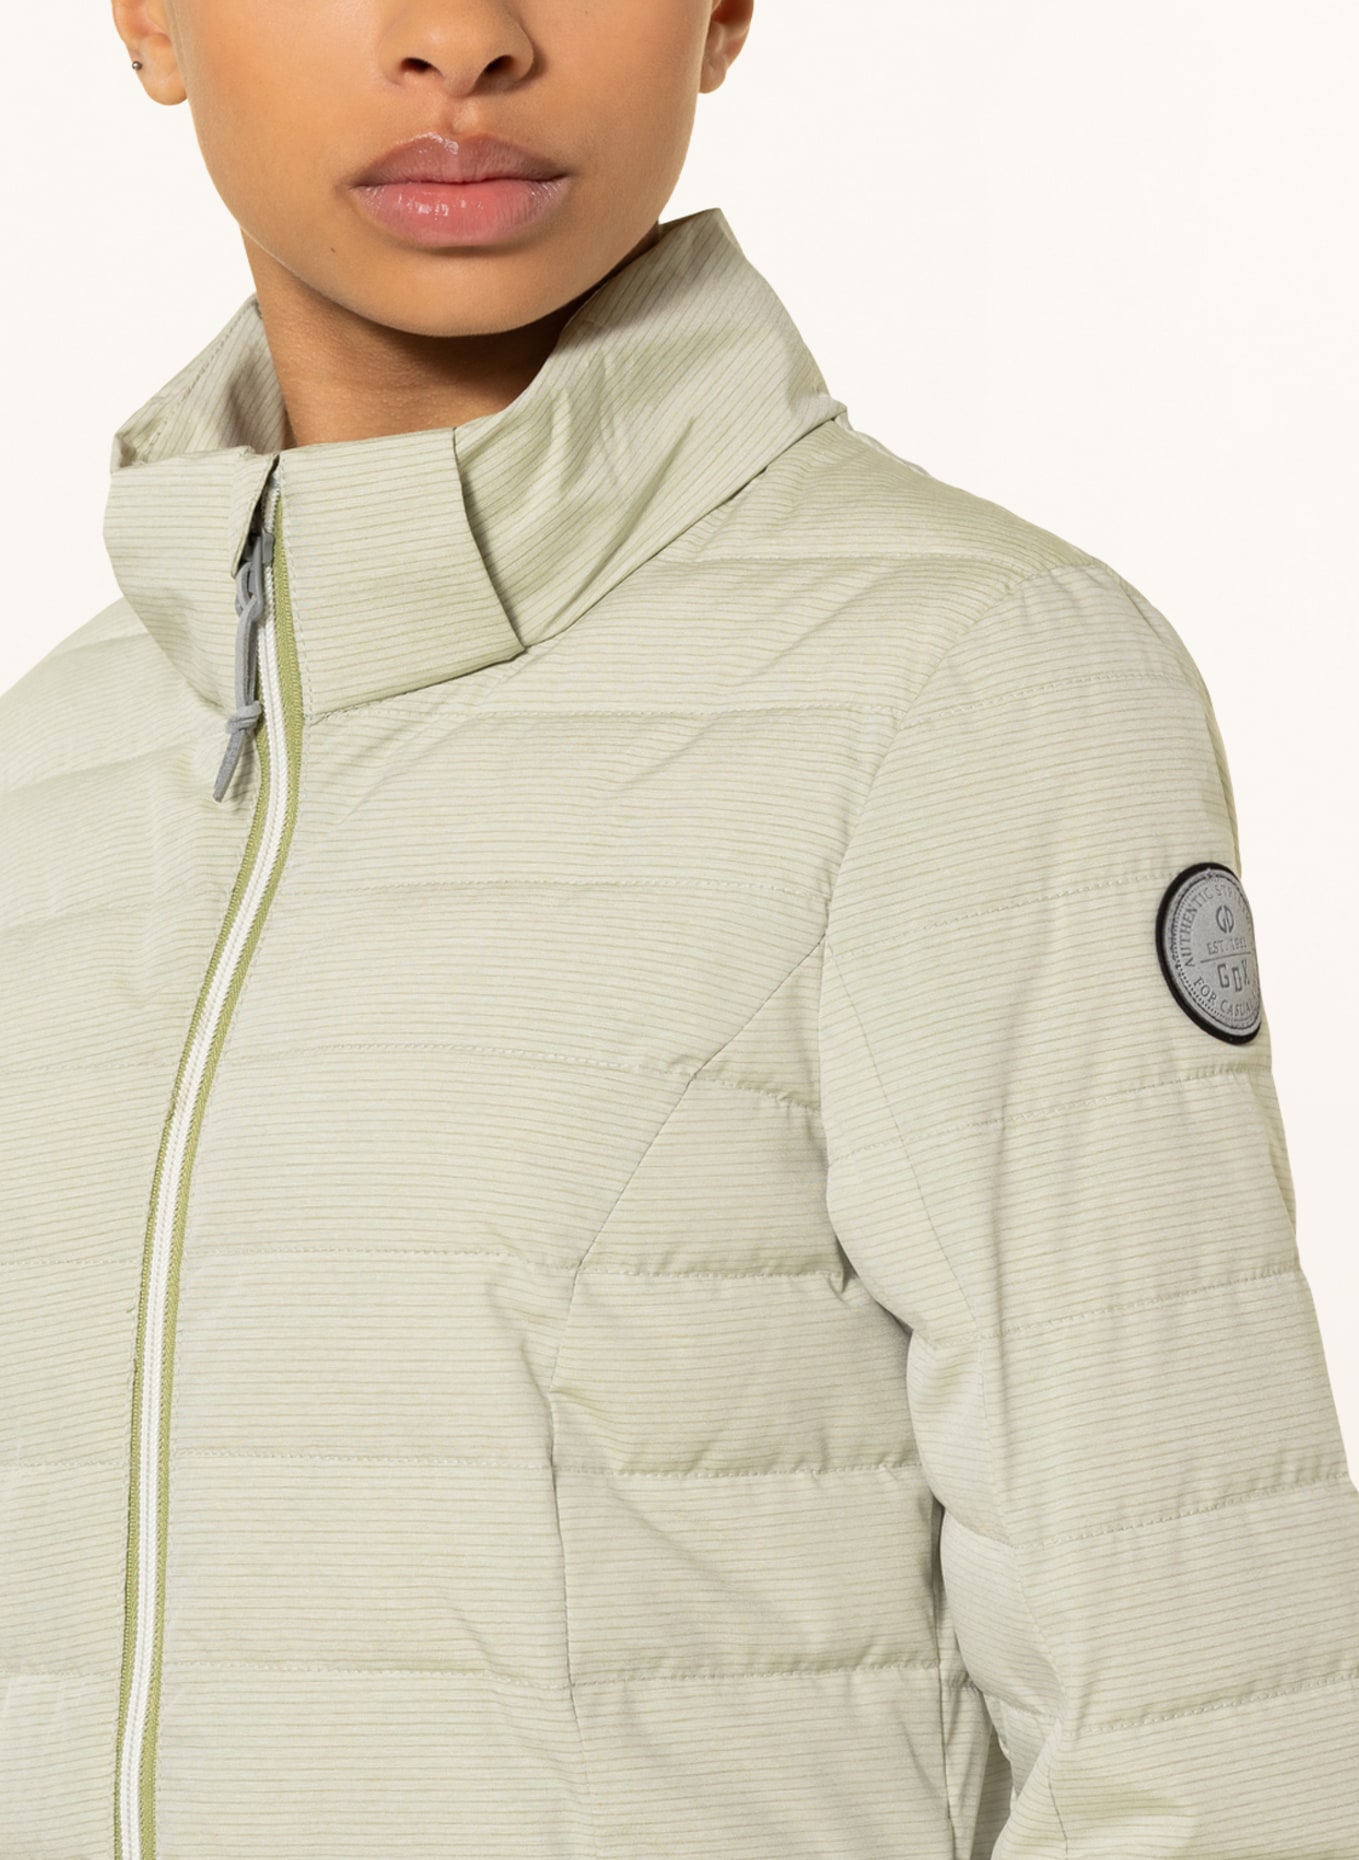 UYAKA jacket DX Quilted by killtec green light in G.I.G.A.